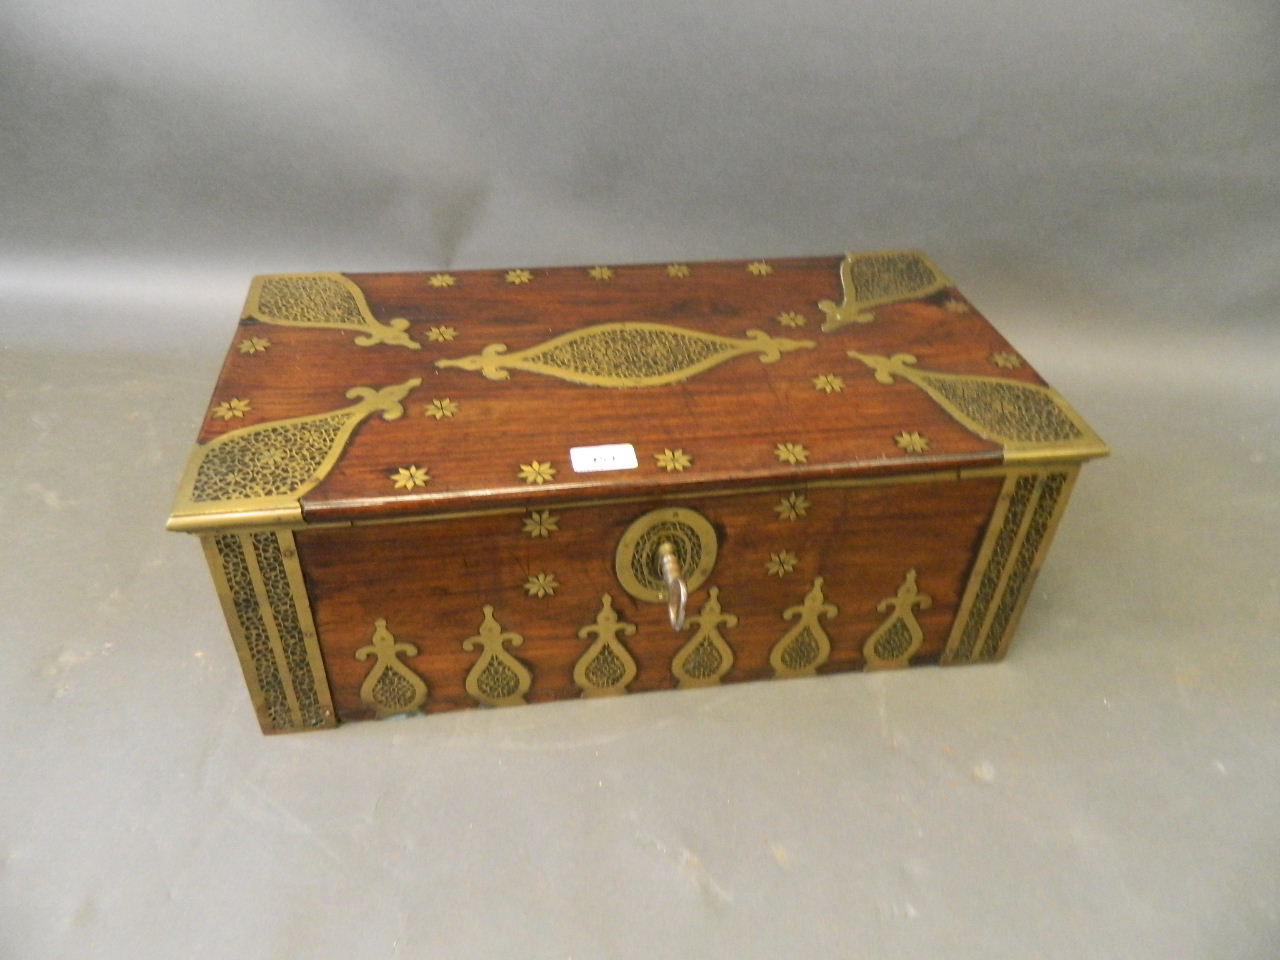 A superb early C19th Batavian hardwood casket with pierced brass mounted and inlaid decoration,